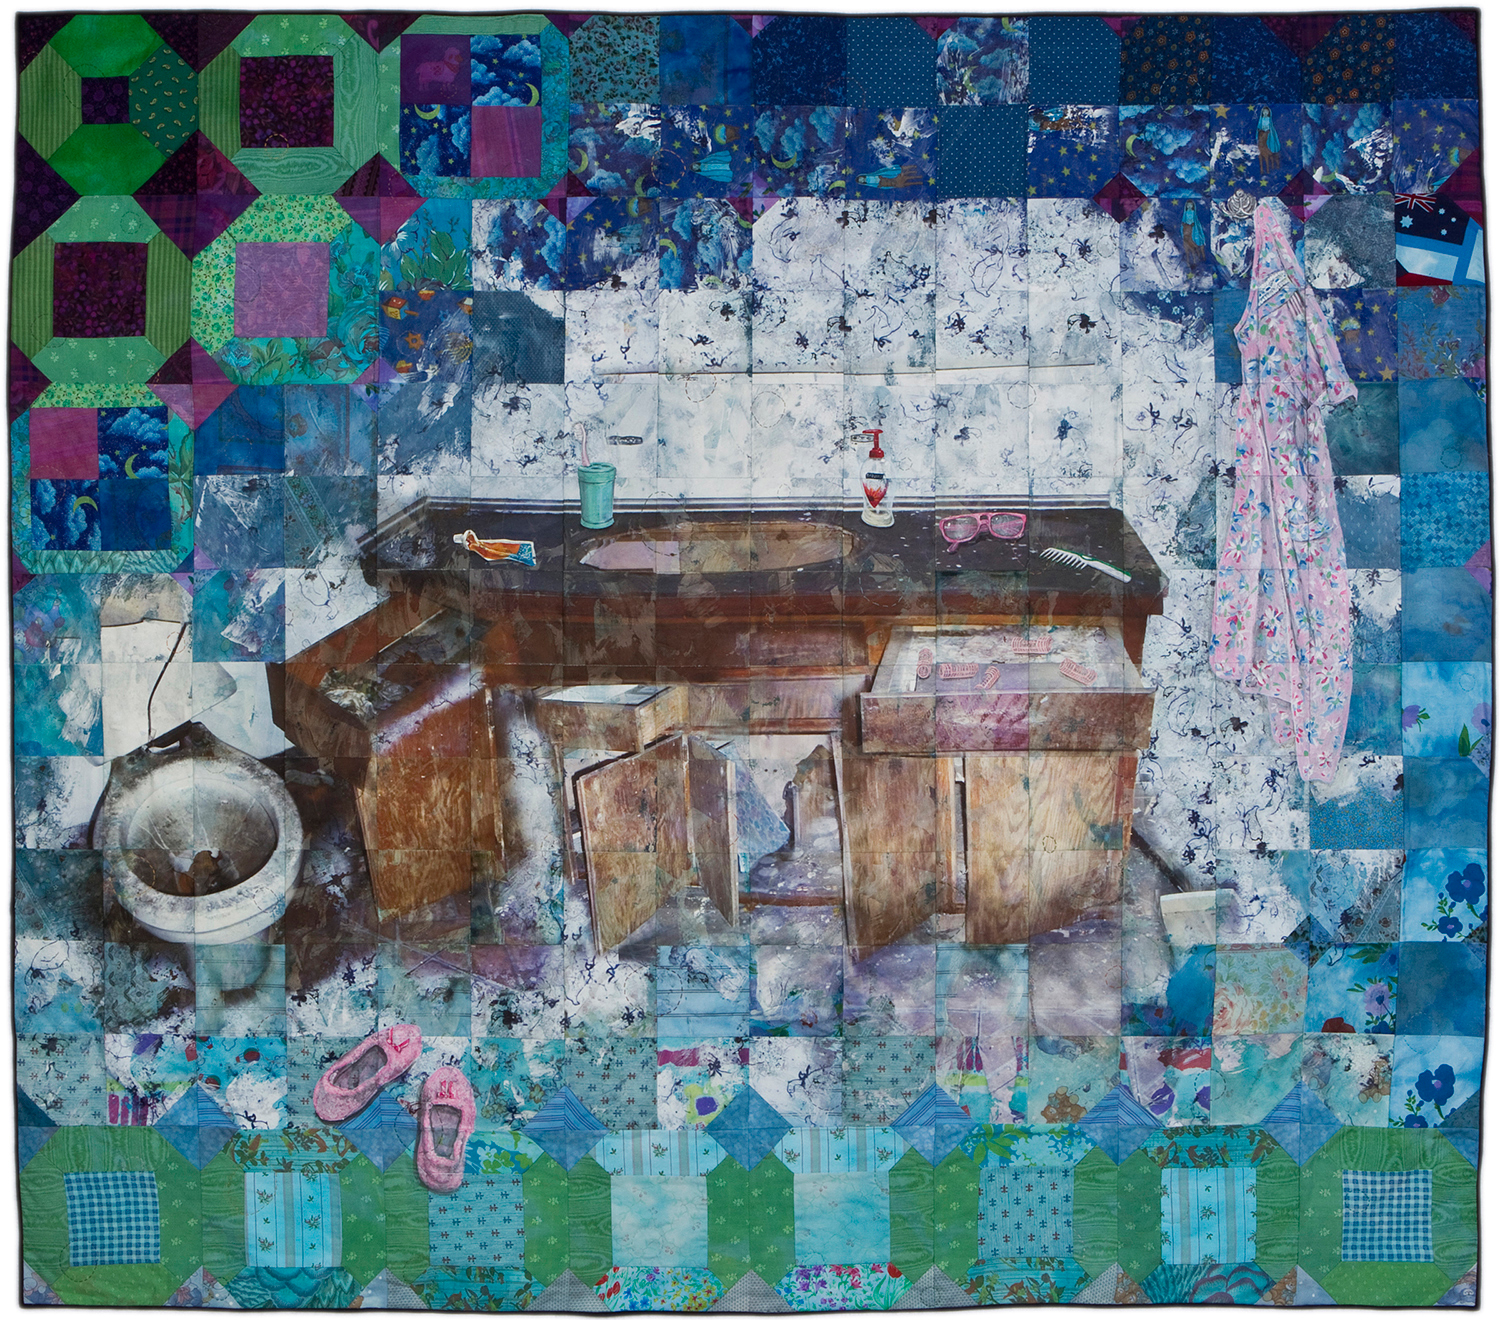 Jeana Eve Klein, Untapped Potential, 2013. Mixed media quilt (Digital printing, acrylic paint and dye on recycled fabric; machine-pieced and hand-quilted), 36 x 24 in.